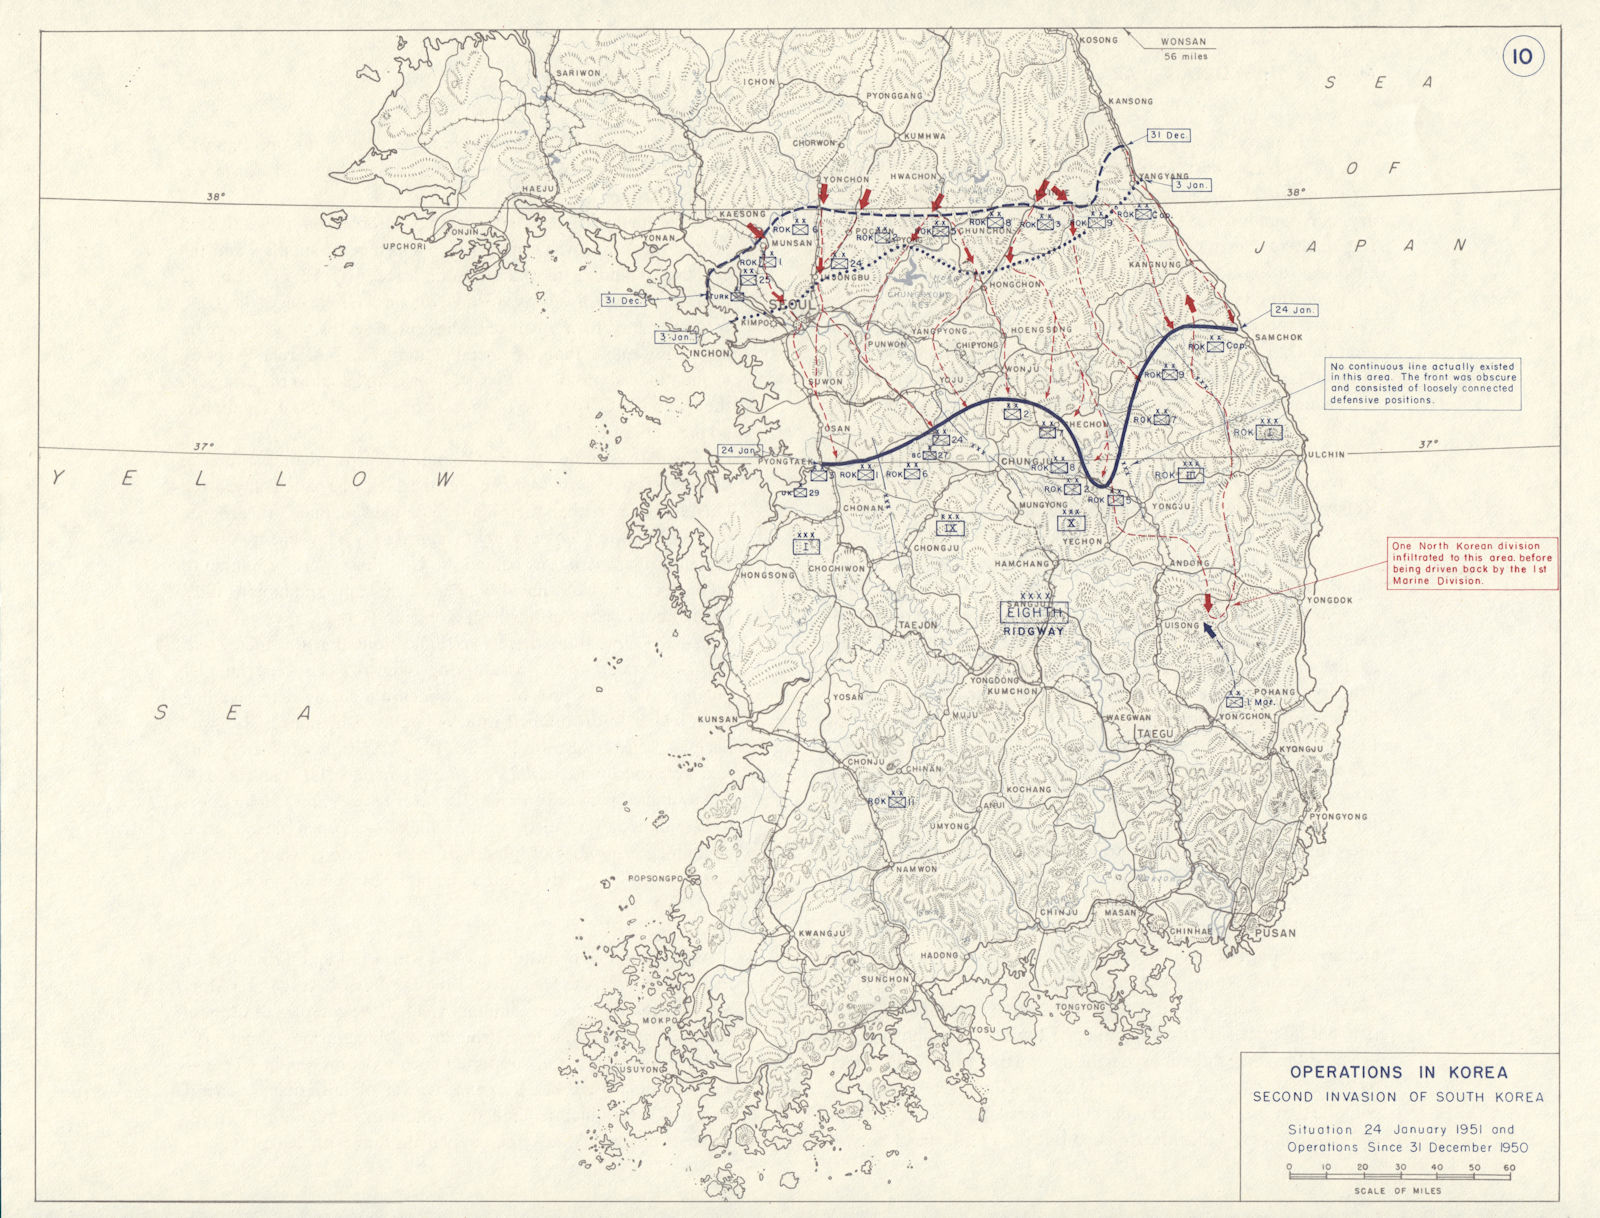 Korean War. 1-24 January 1951. Second Invasion of South Korea 1959 old map